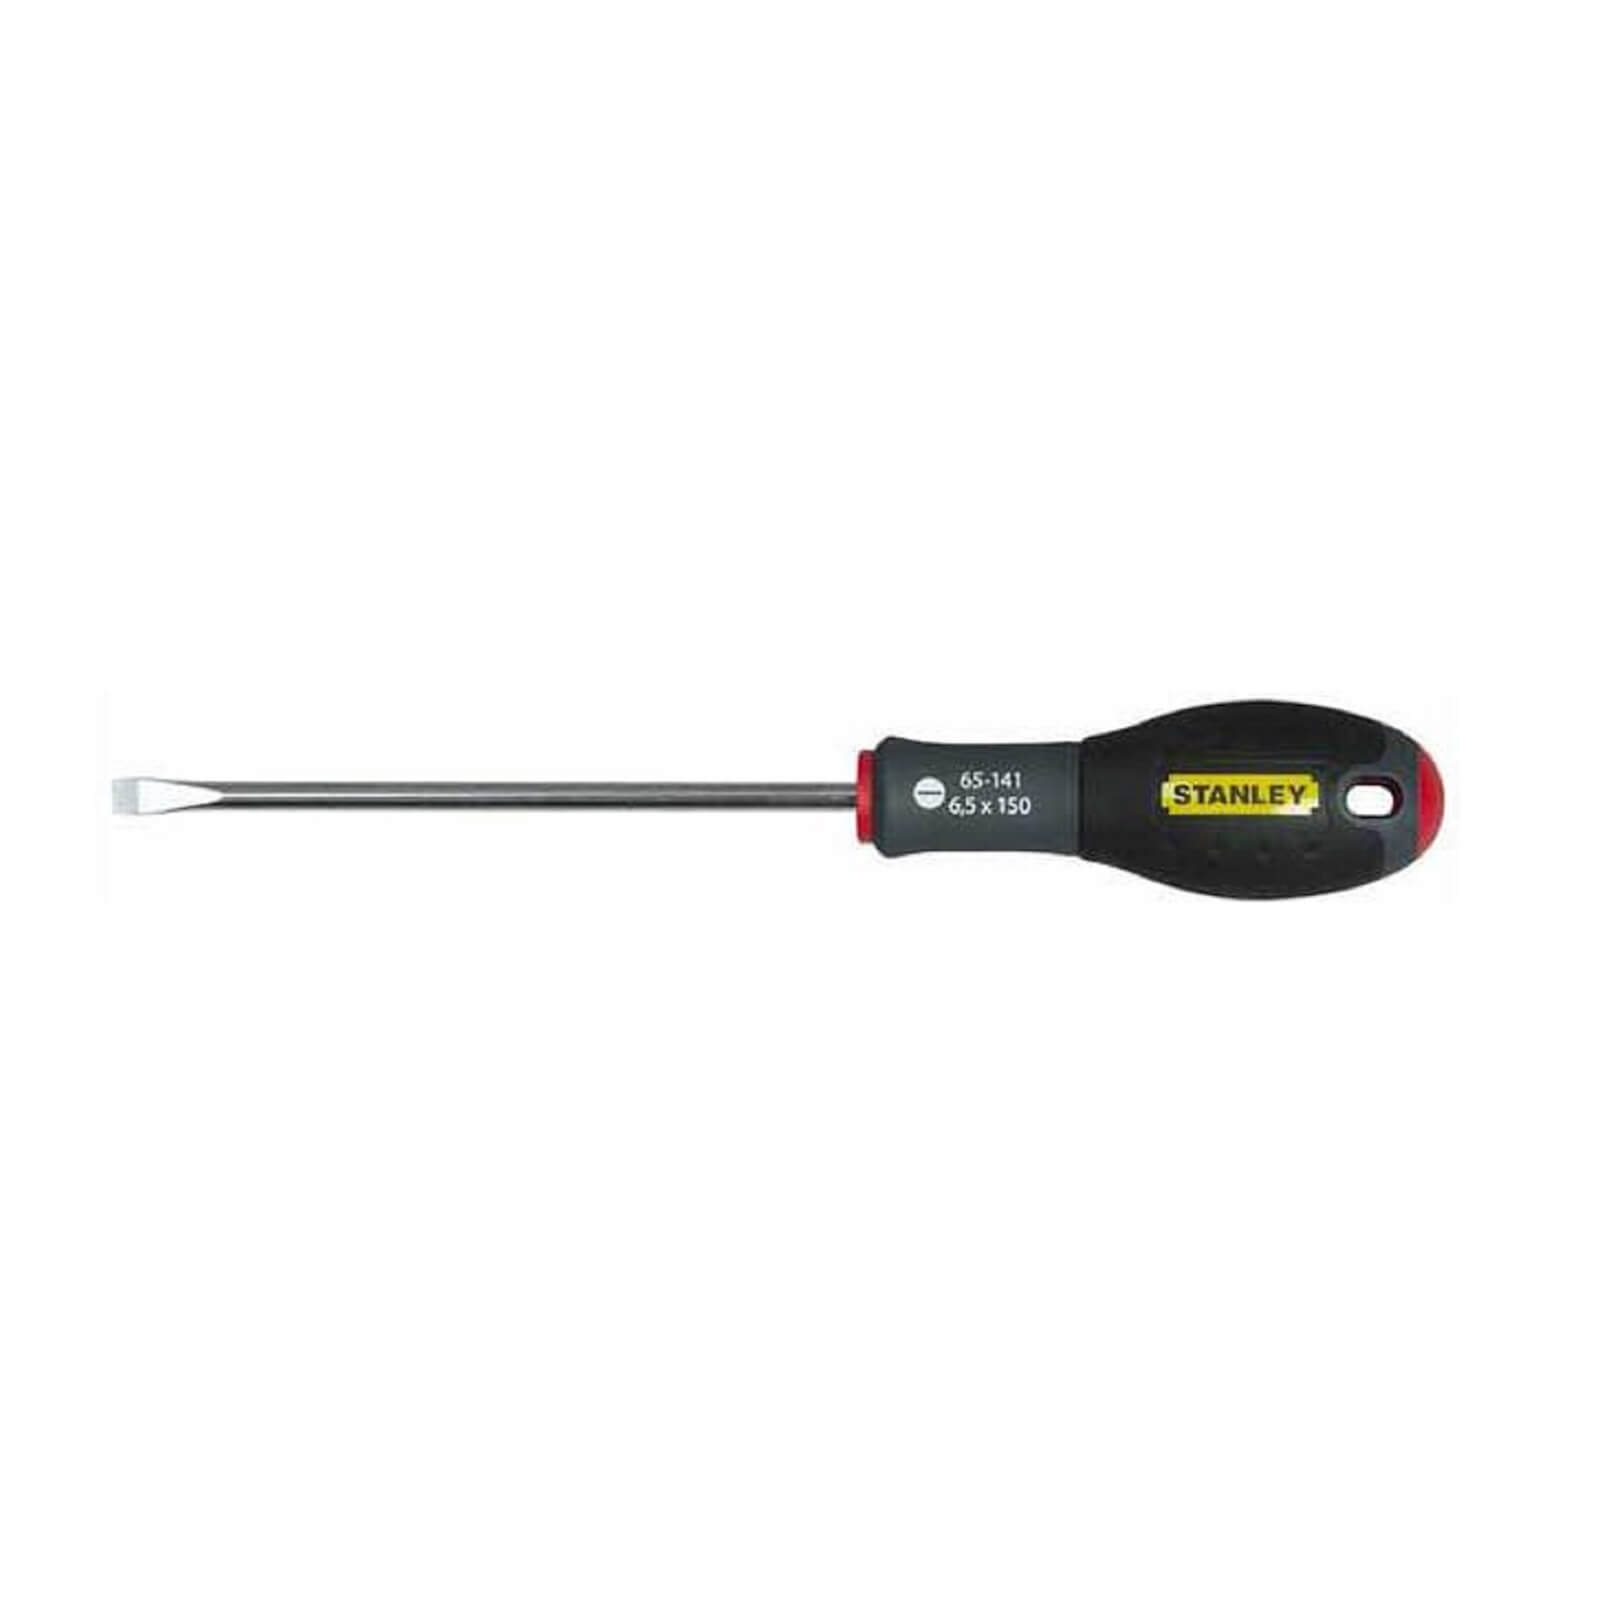 Photo of Stanley Fatmax Flared Screwdriver - 8x150mm